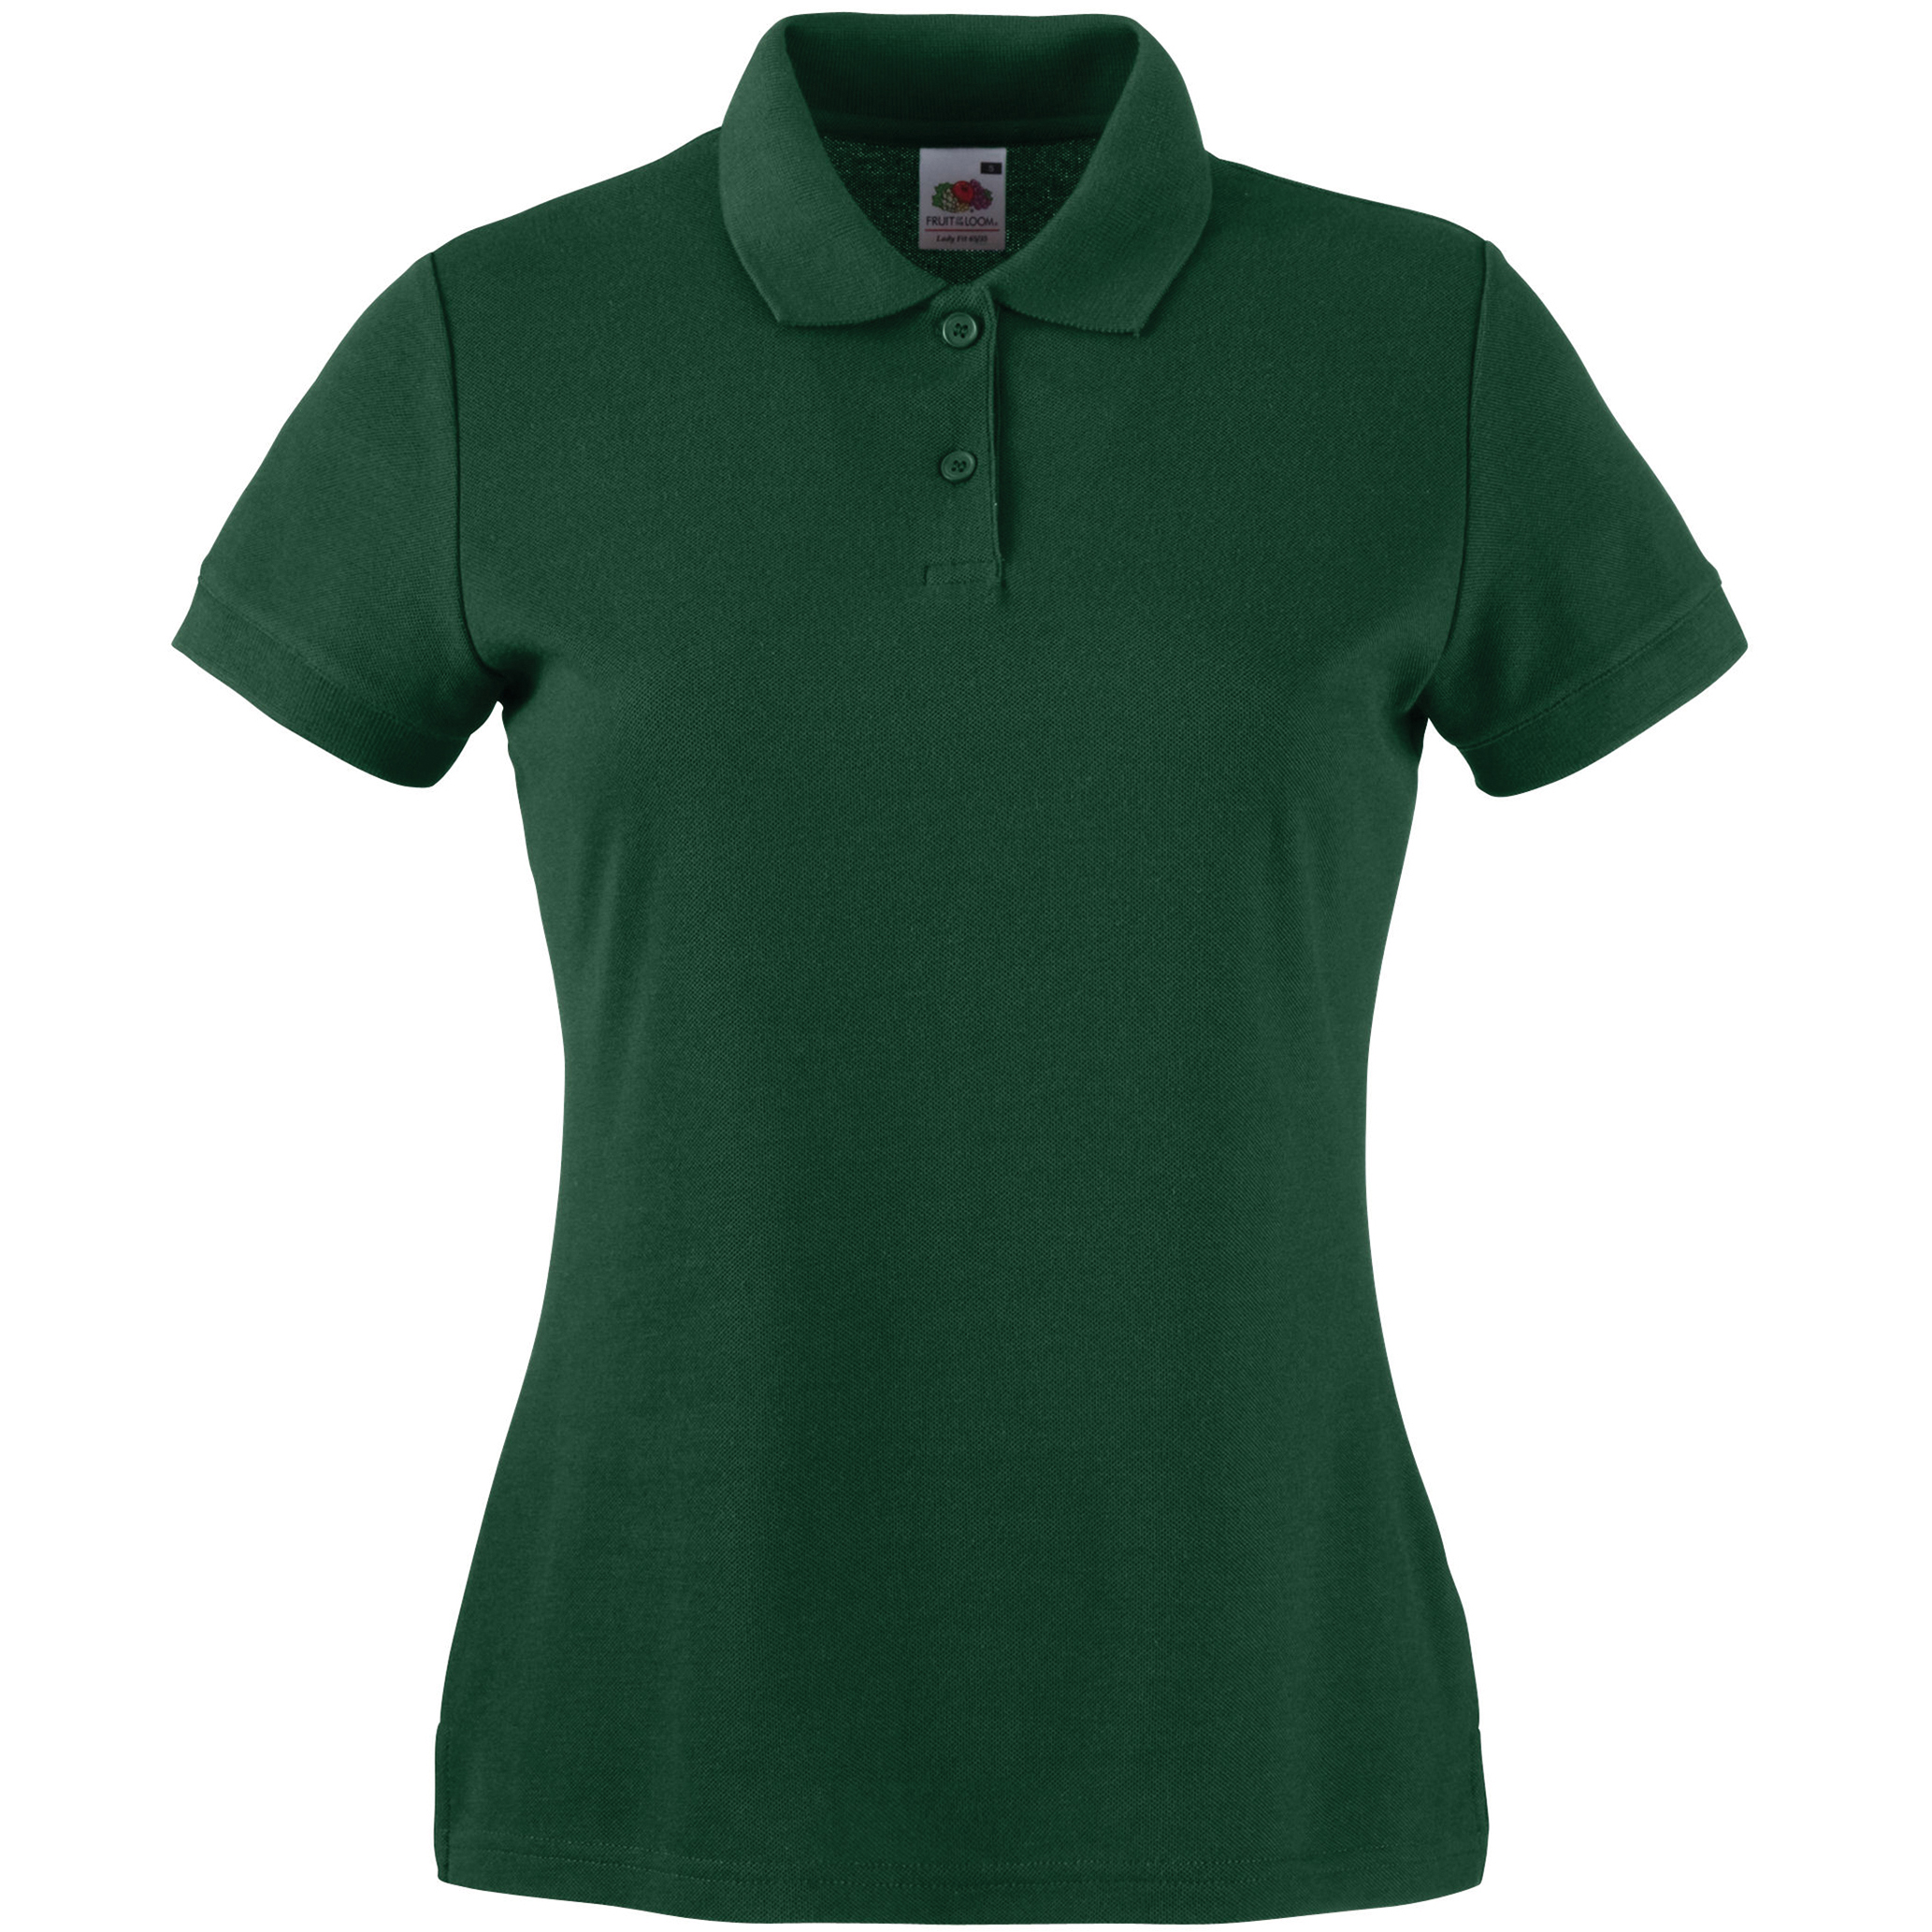 ax-httpswebsystems.s3.amazonaws.comtmp_for_downloadfruit-of-the-loom-ladies-65-35-polo-bottle-green.jpg